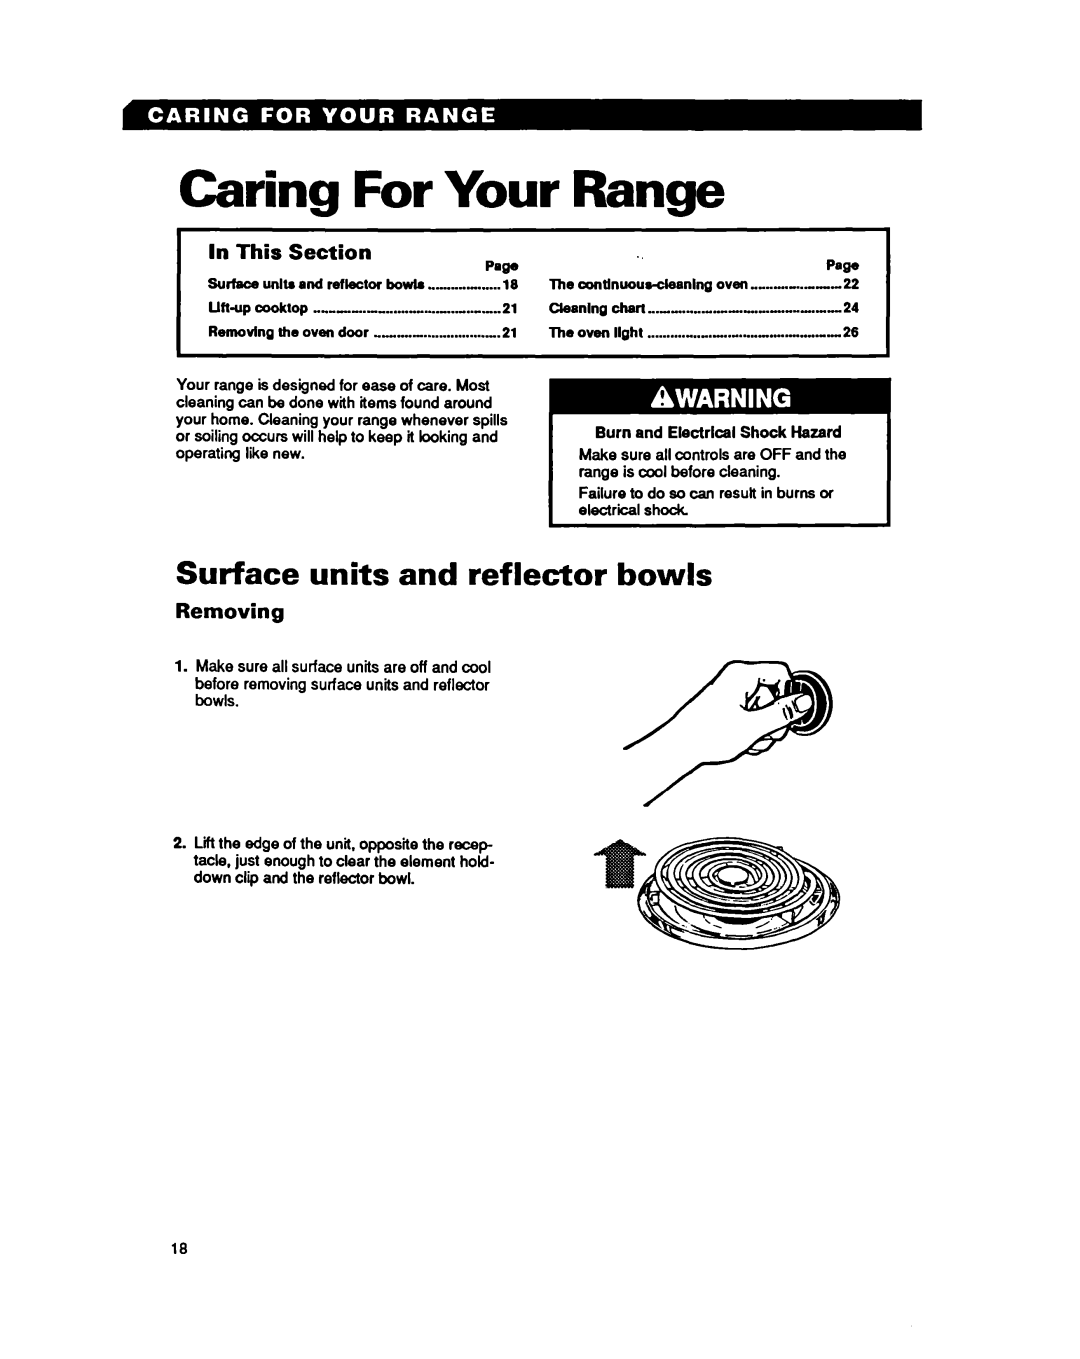 Whirlpool RF330PXY manual Caring For Your Range, Surface units and reflector bowls, In This, Section, Removing 